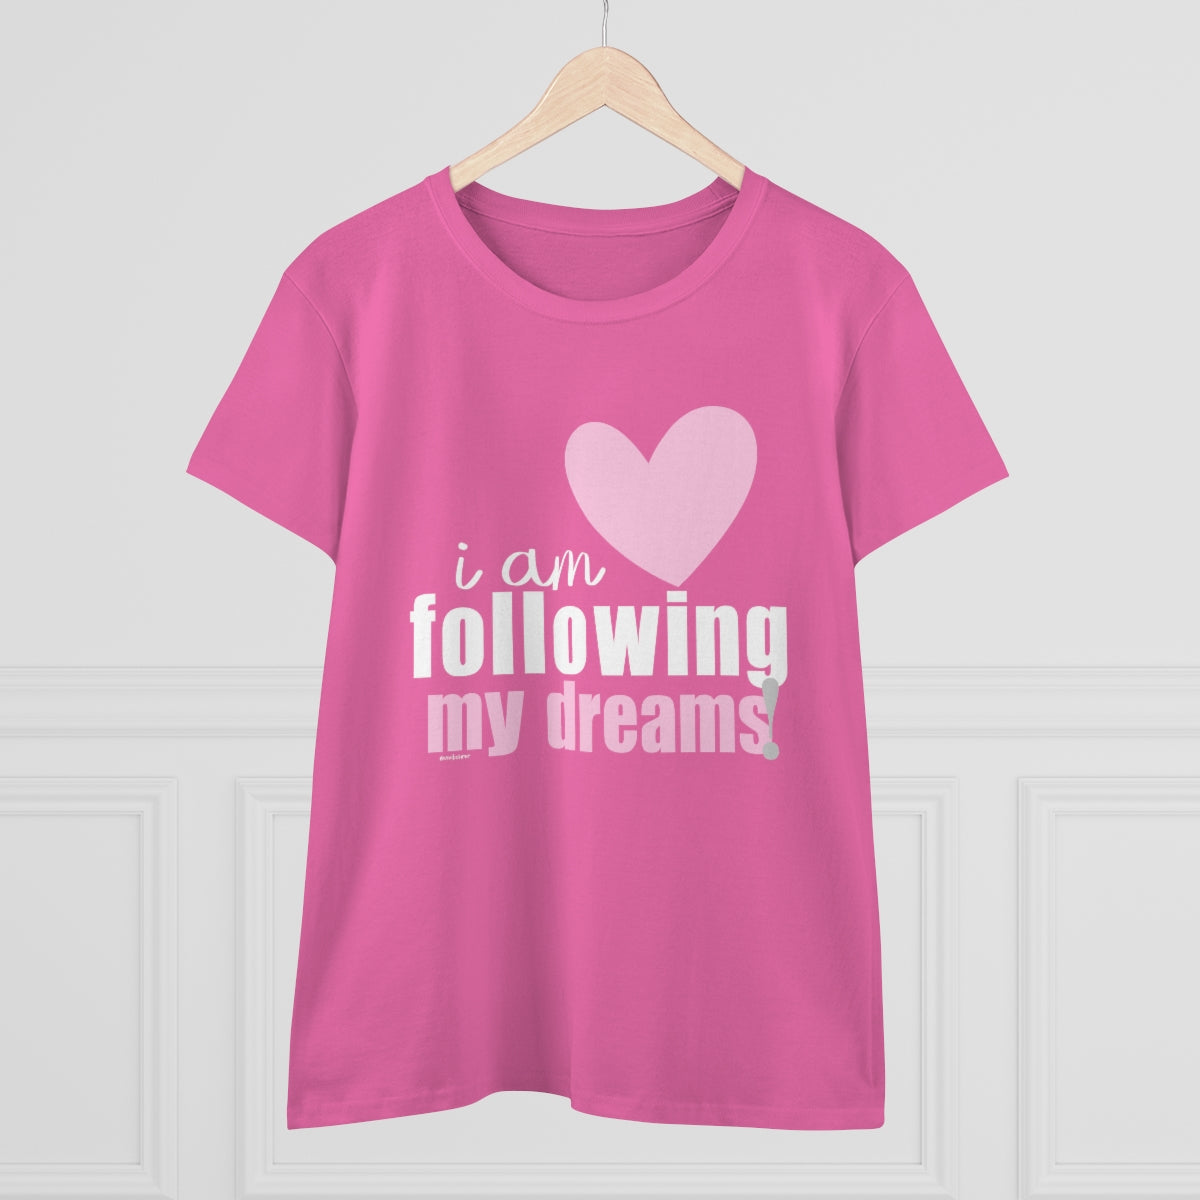 I am following my DREAMS .: Women's Midweight 100% Cotton Tee (Semi-fitted)